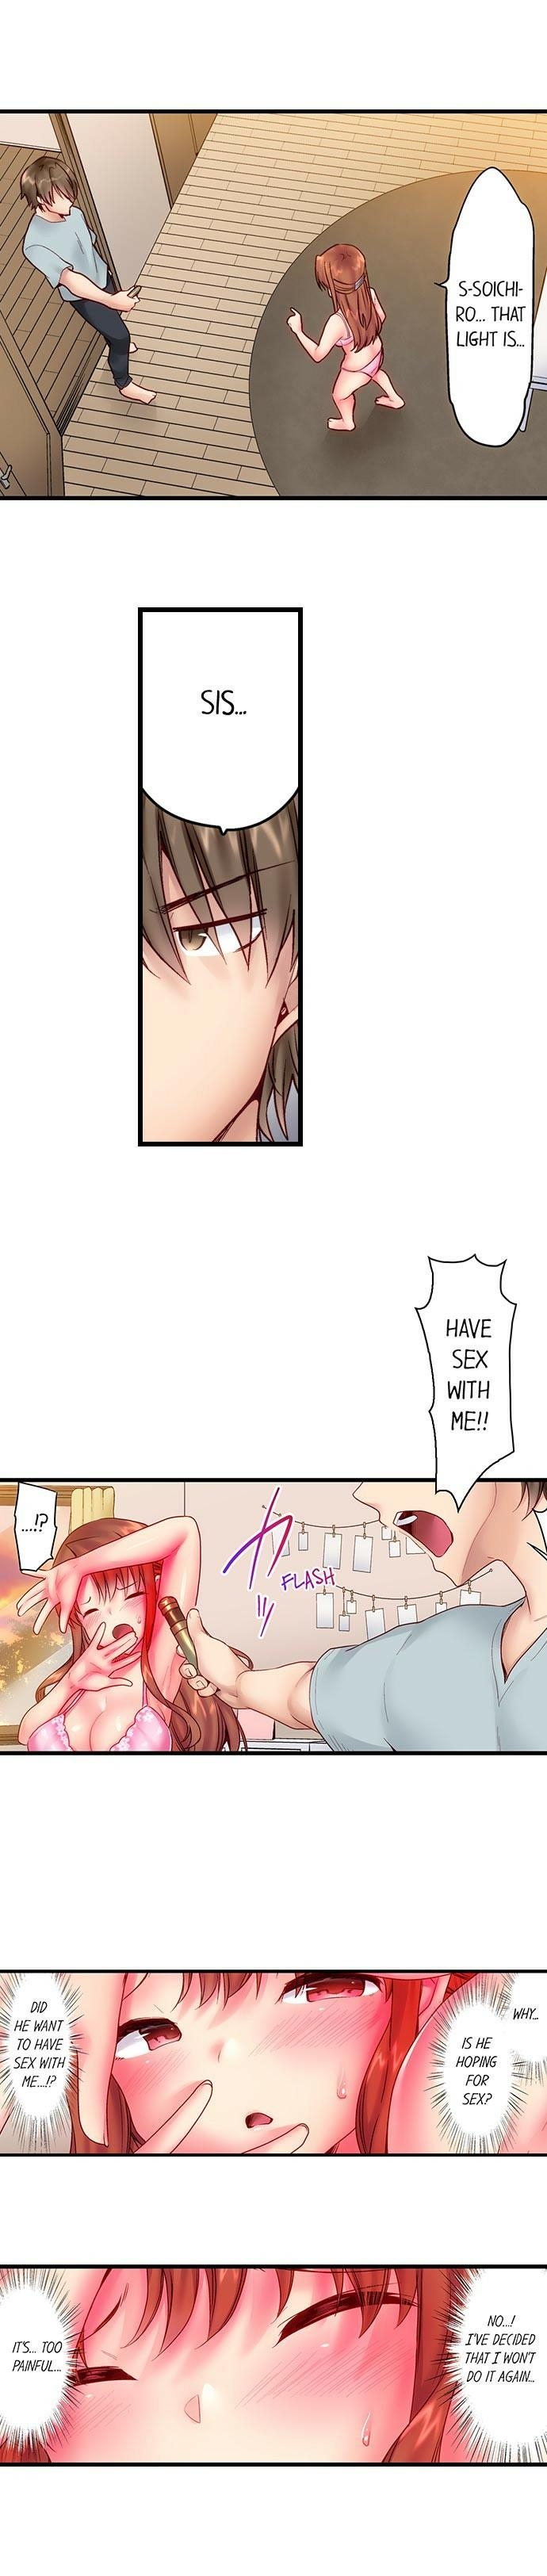 [Yuuki HB] "Hypnotized" Sex with My Brother Ch.21/? [English] [Ongoing] 180